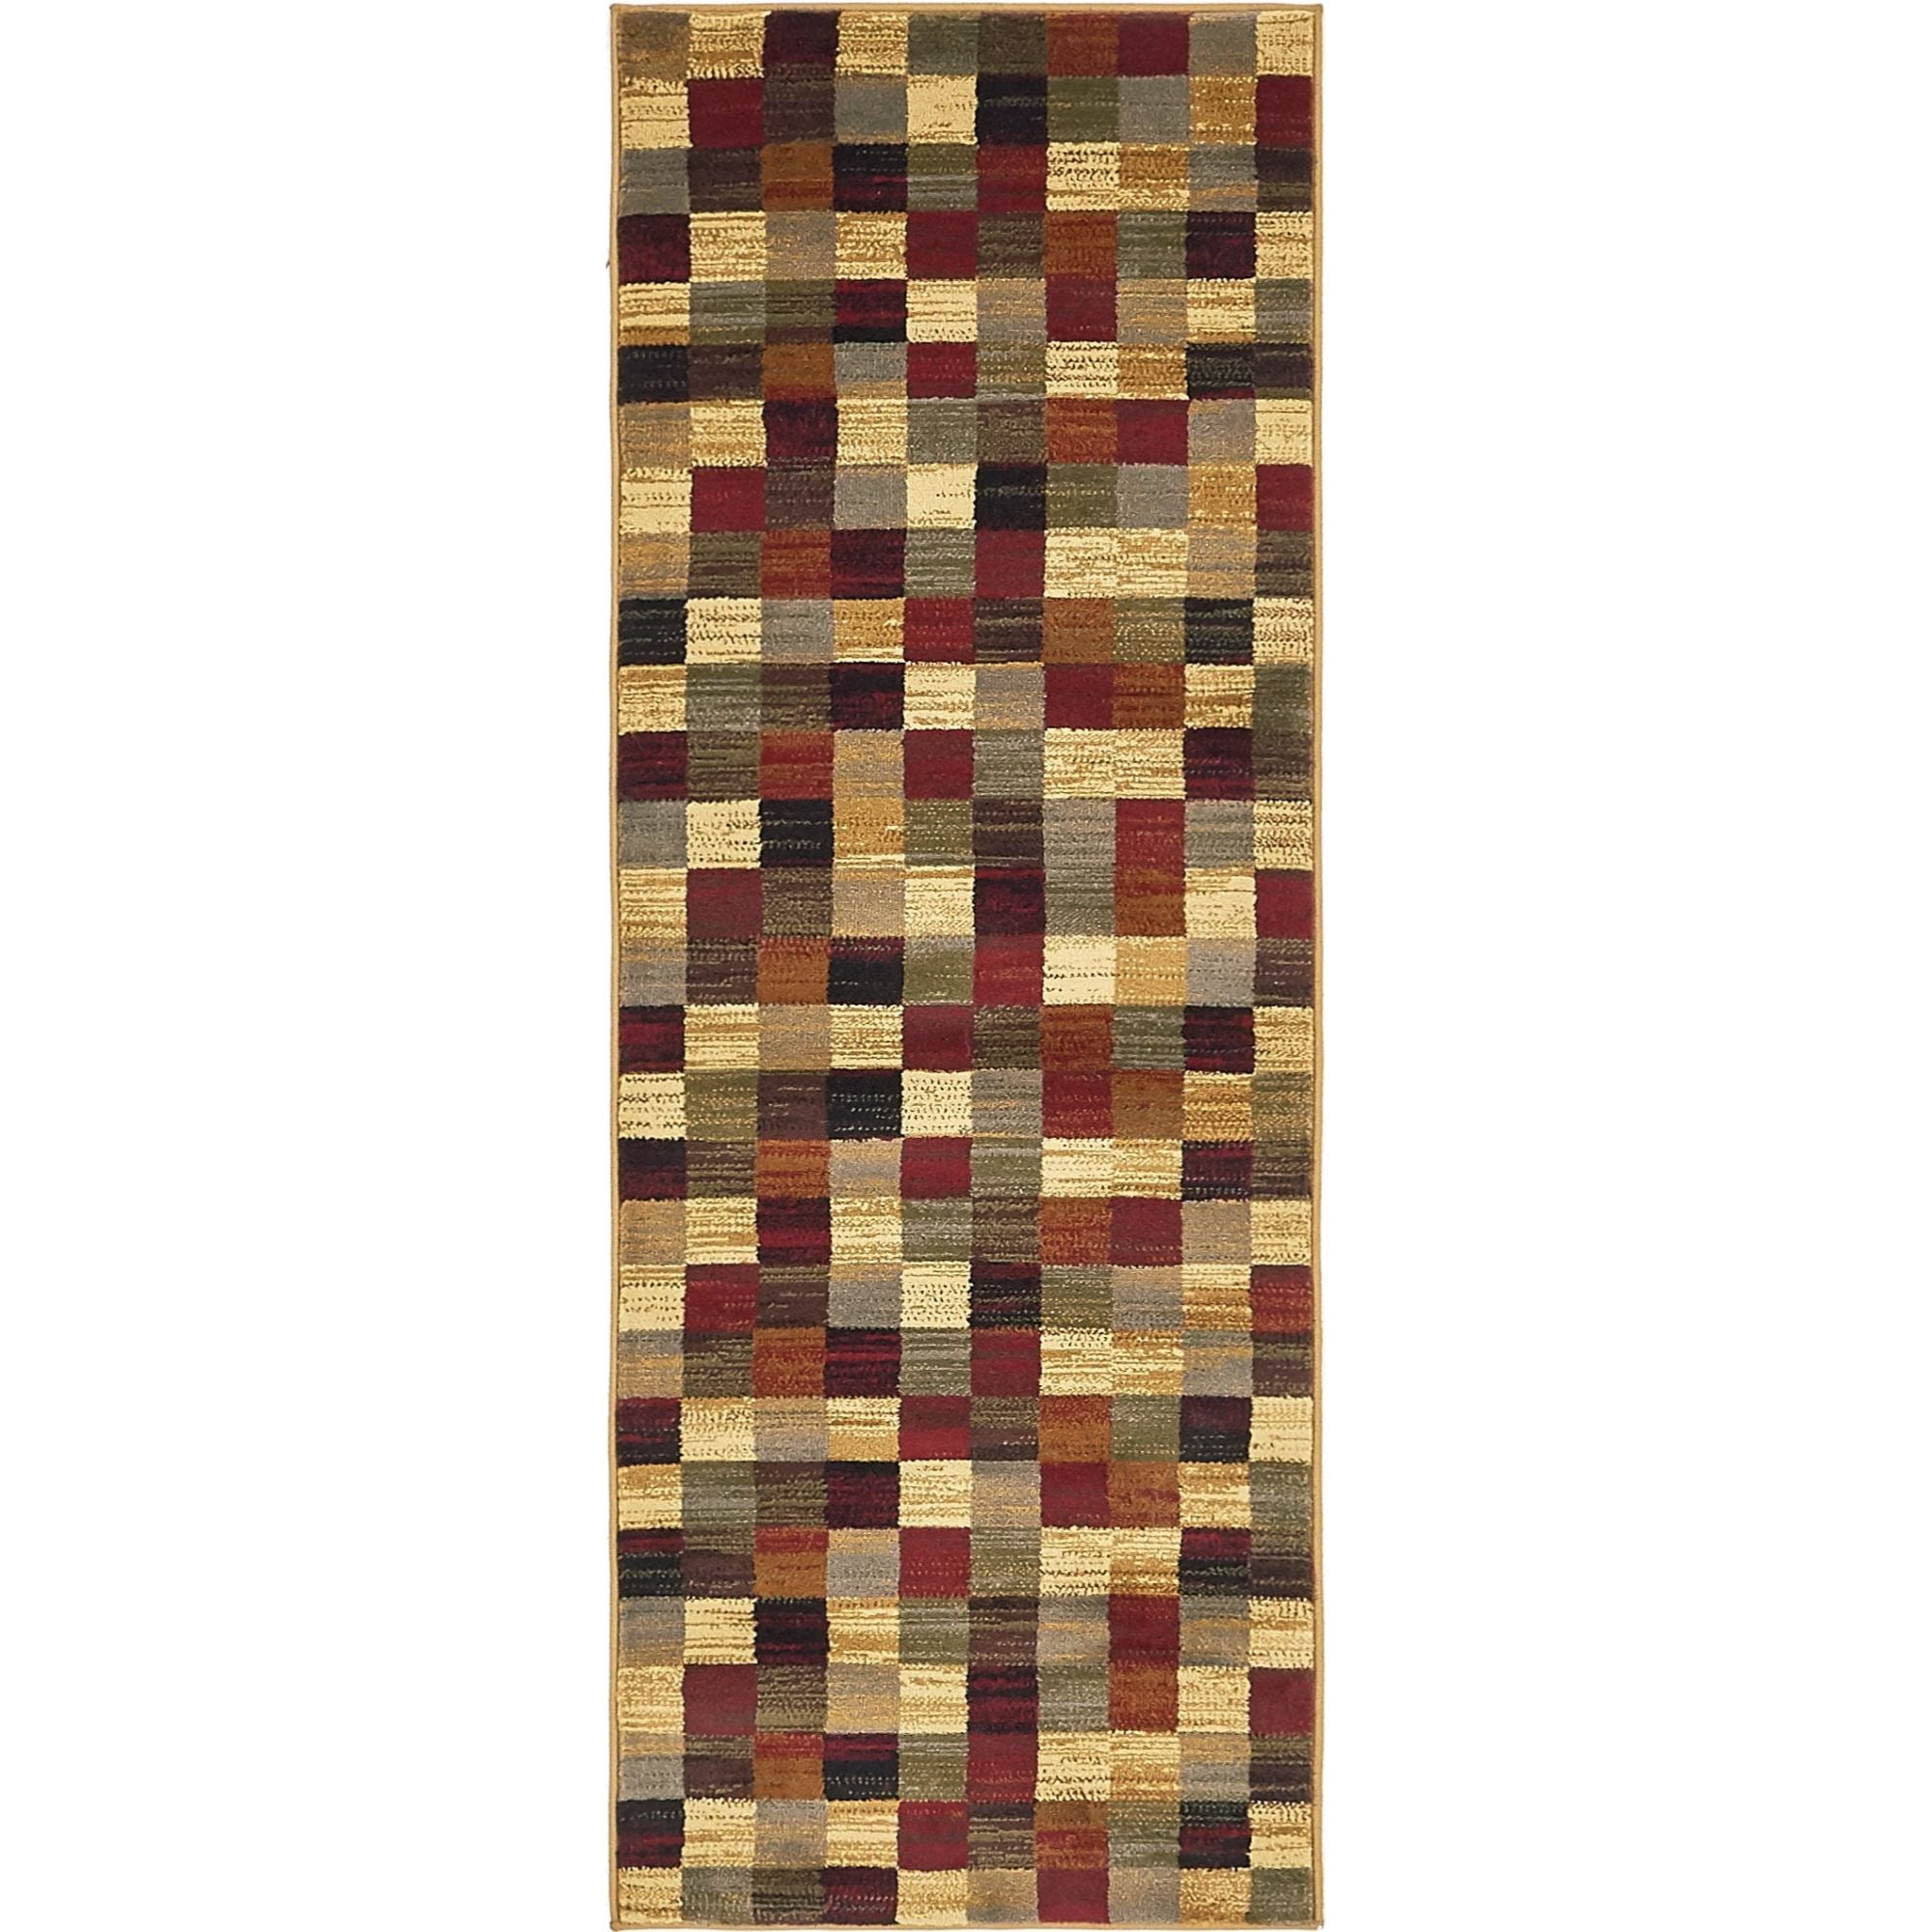 Unique Loom Checkered Outdoor Rug, Size: 2'2 x 6, Brown/Black